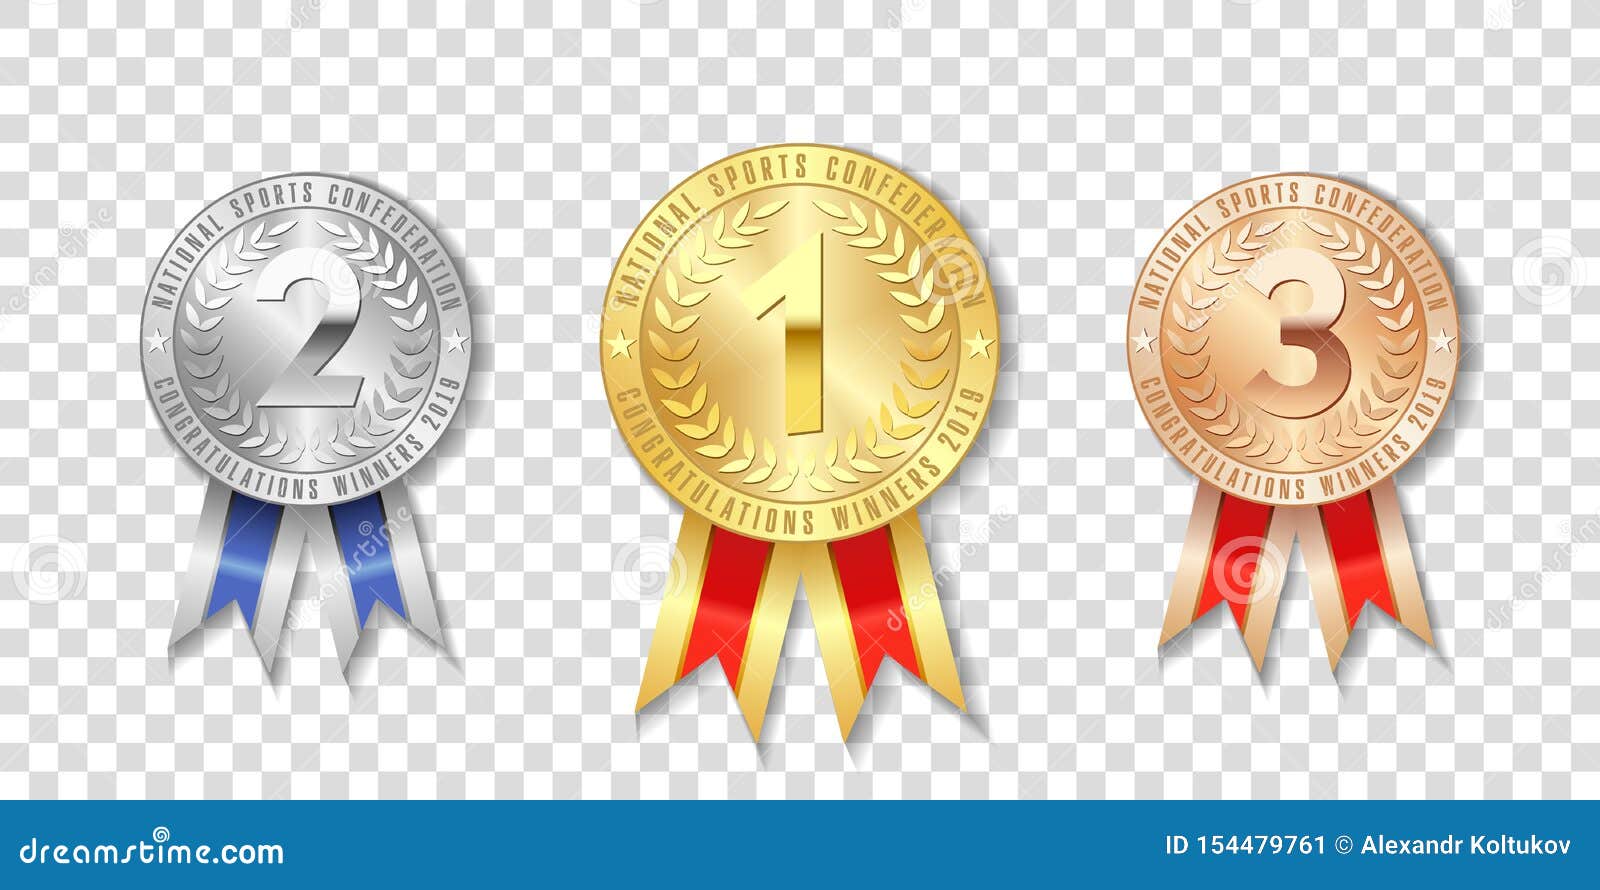 Amlong Plus Gold Silver Bronze Award Medals with Premium Ribbon Set of 3